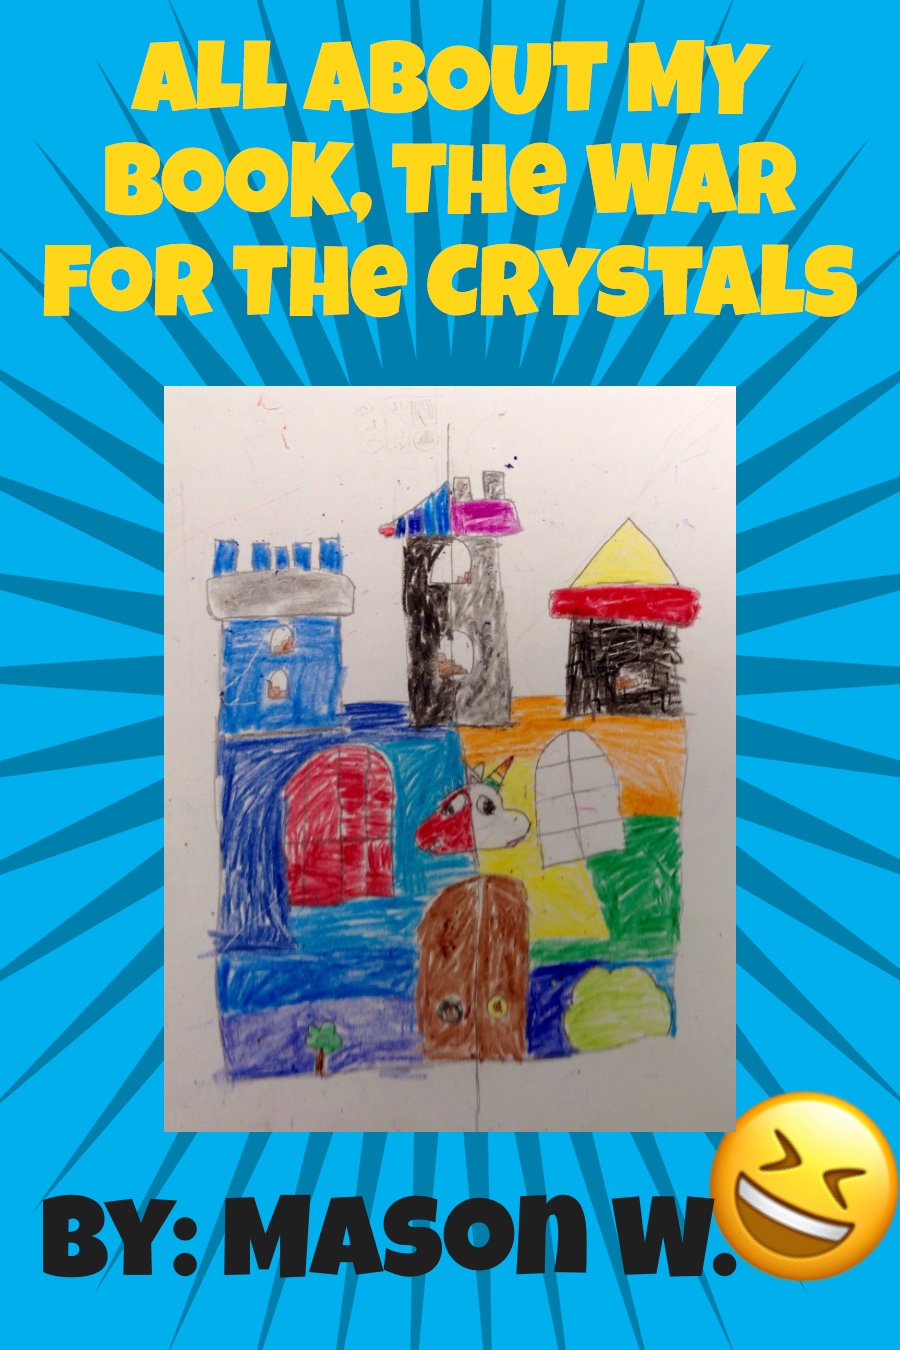 All About The War For The Crystals by Mason W